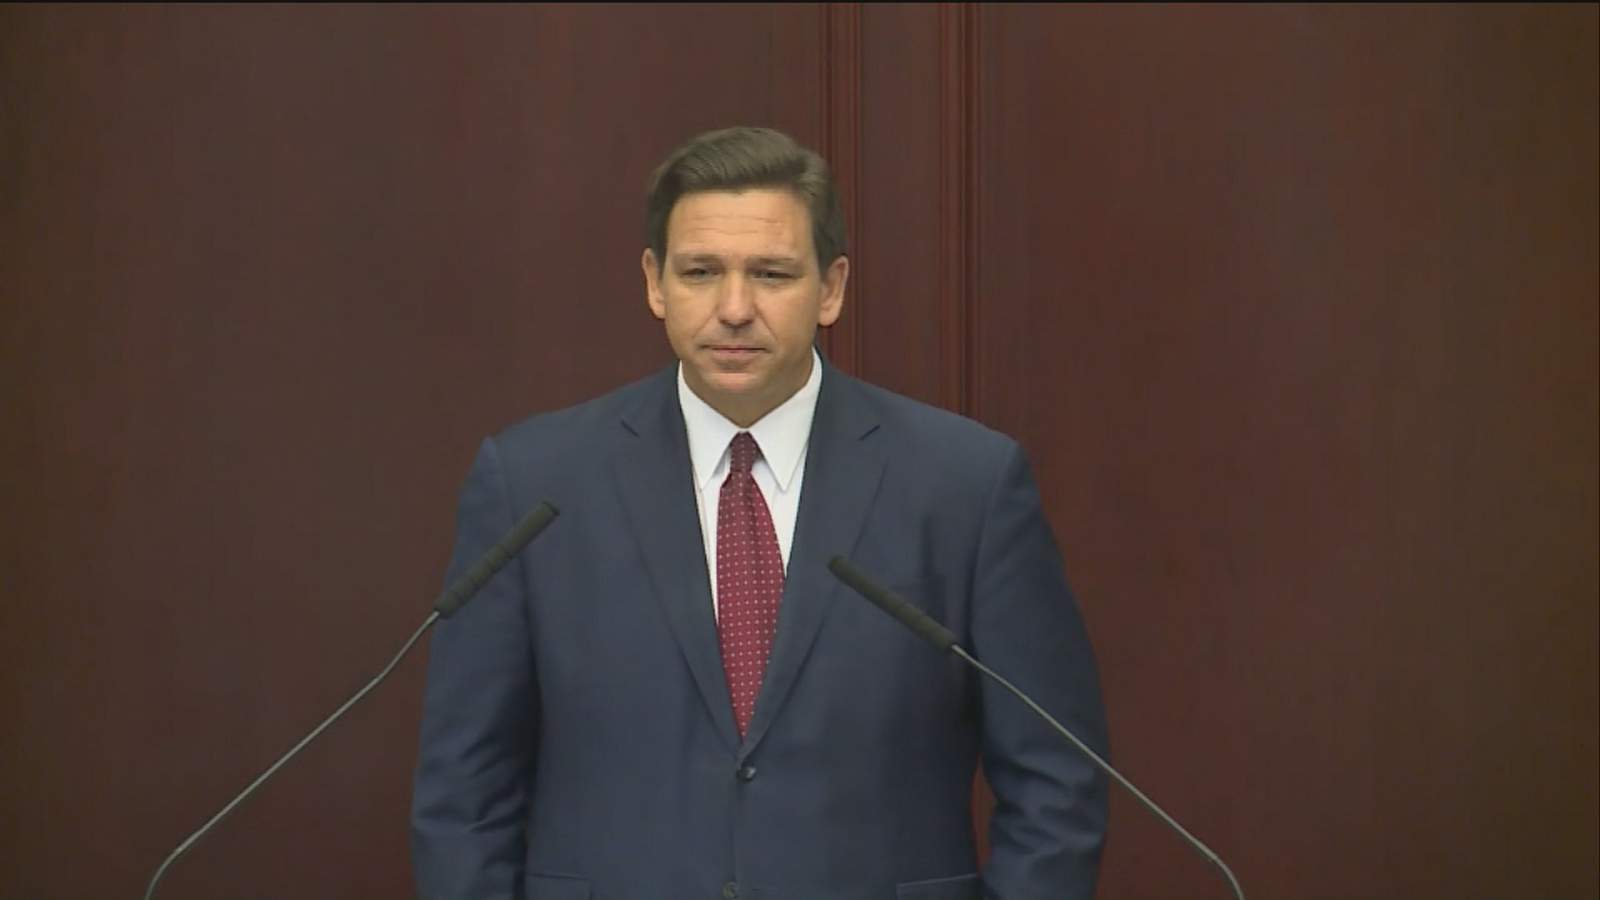 WATCH: Gov. Ron DeSantis delivers State of the State address